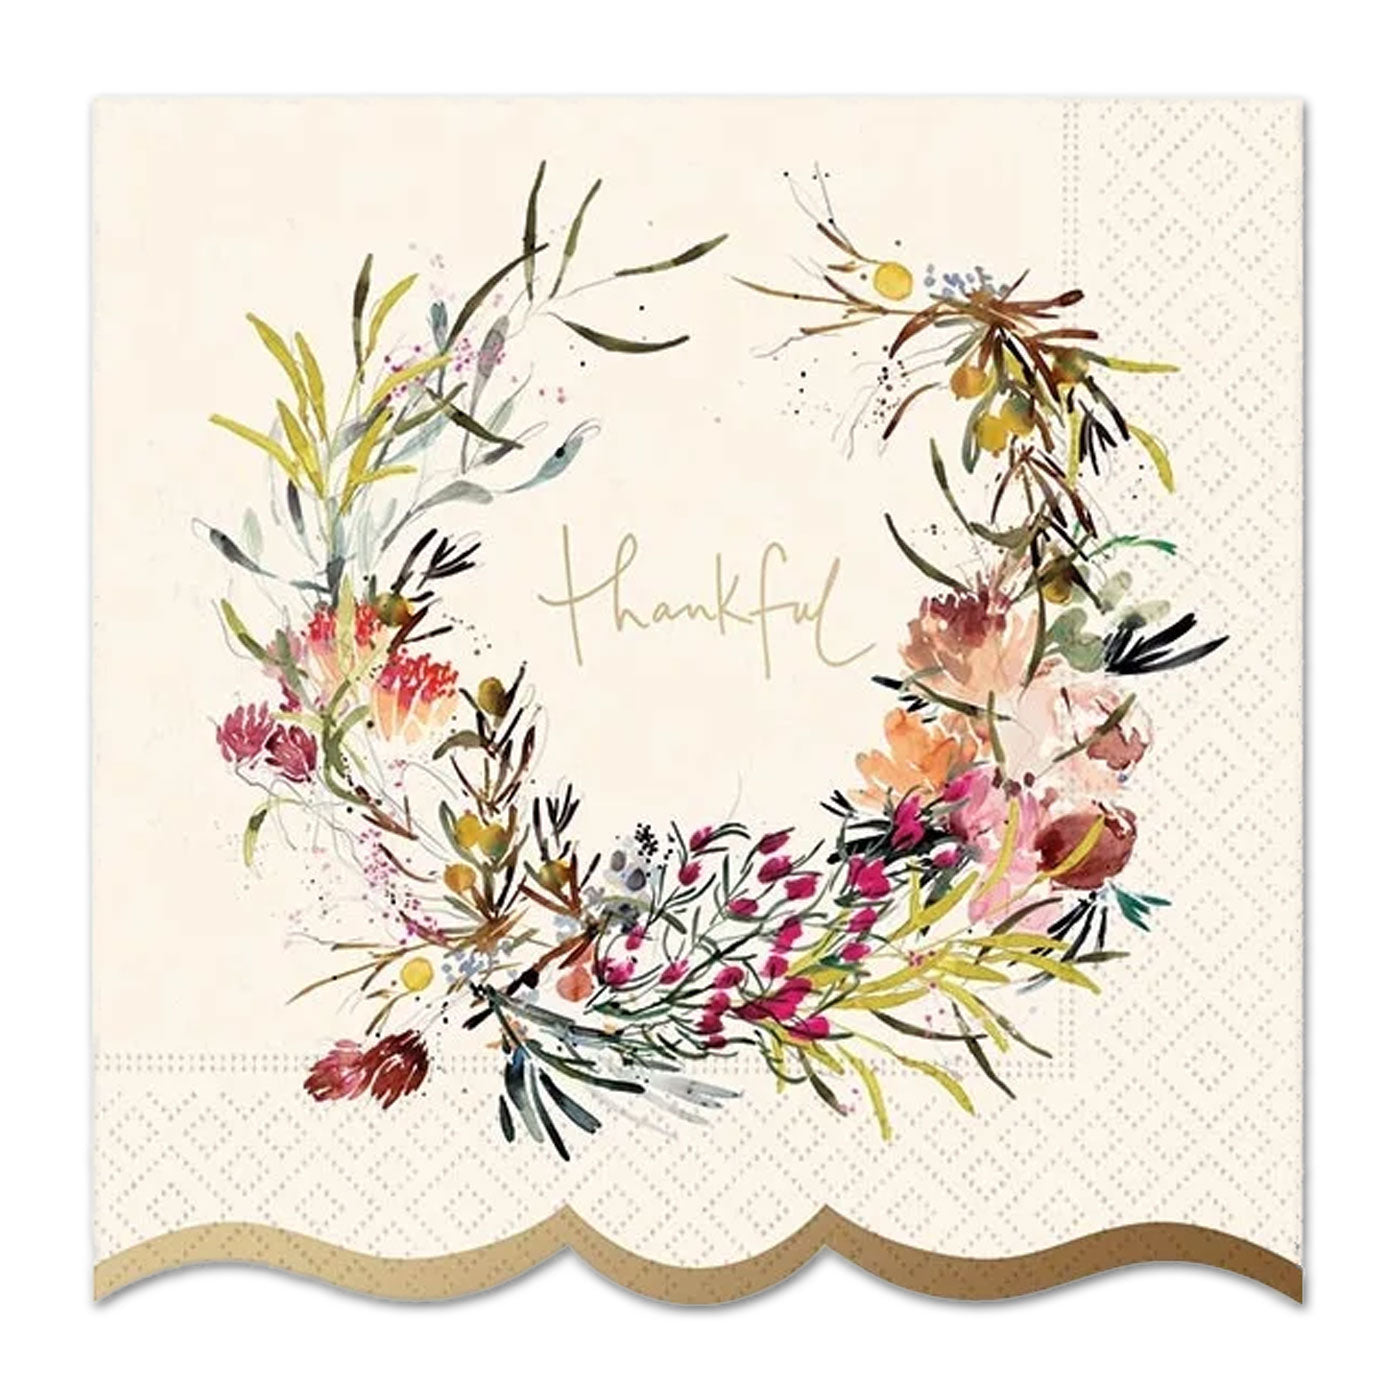 Thankful Splendor Foil Accented Paper Luncheon Napkins